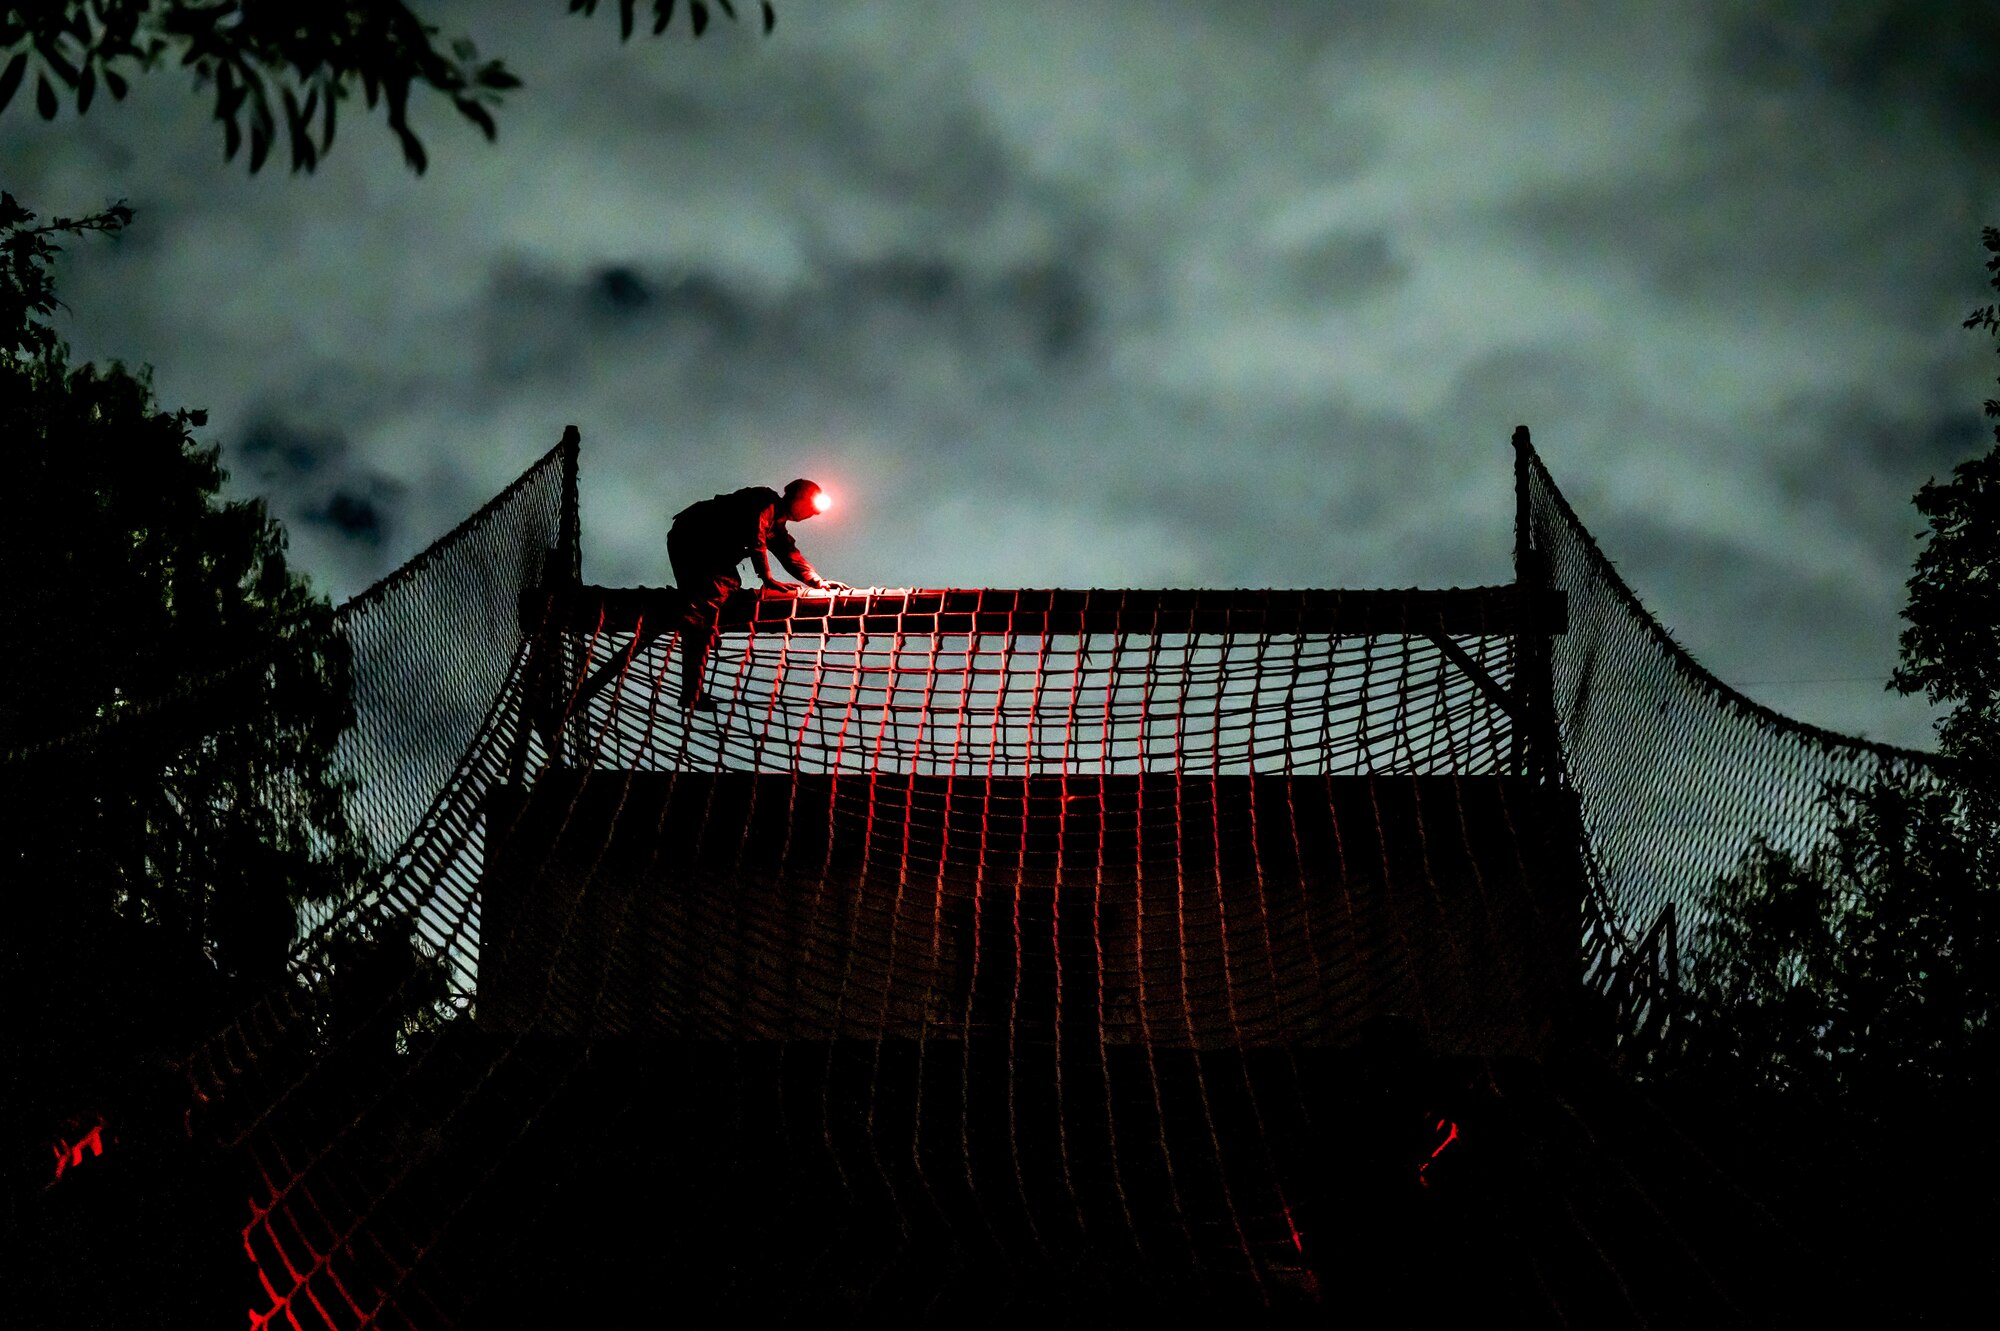 candidate sits on top of rope wall in the dark while his red headlamp illuminates the ropes